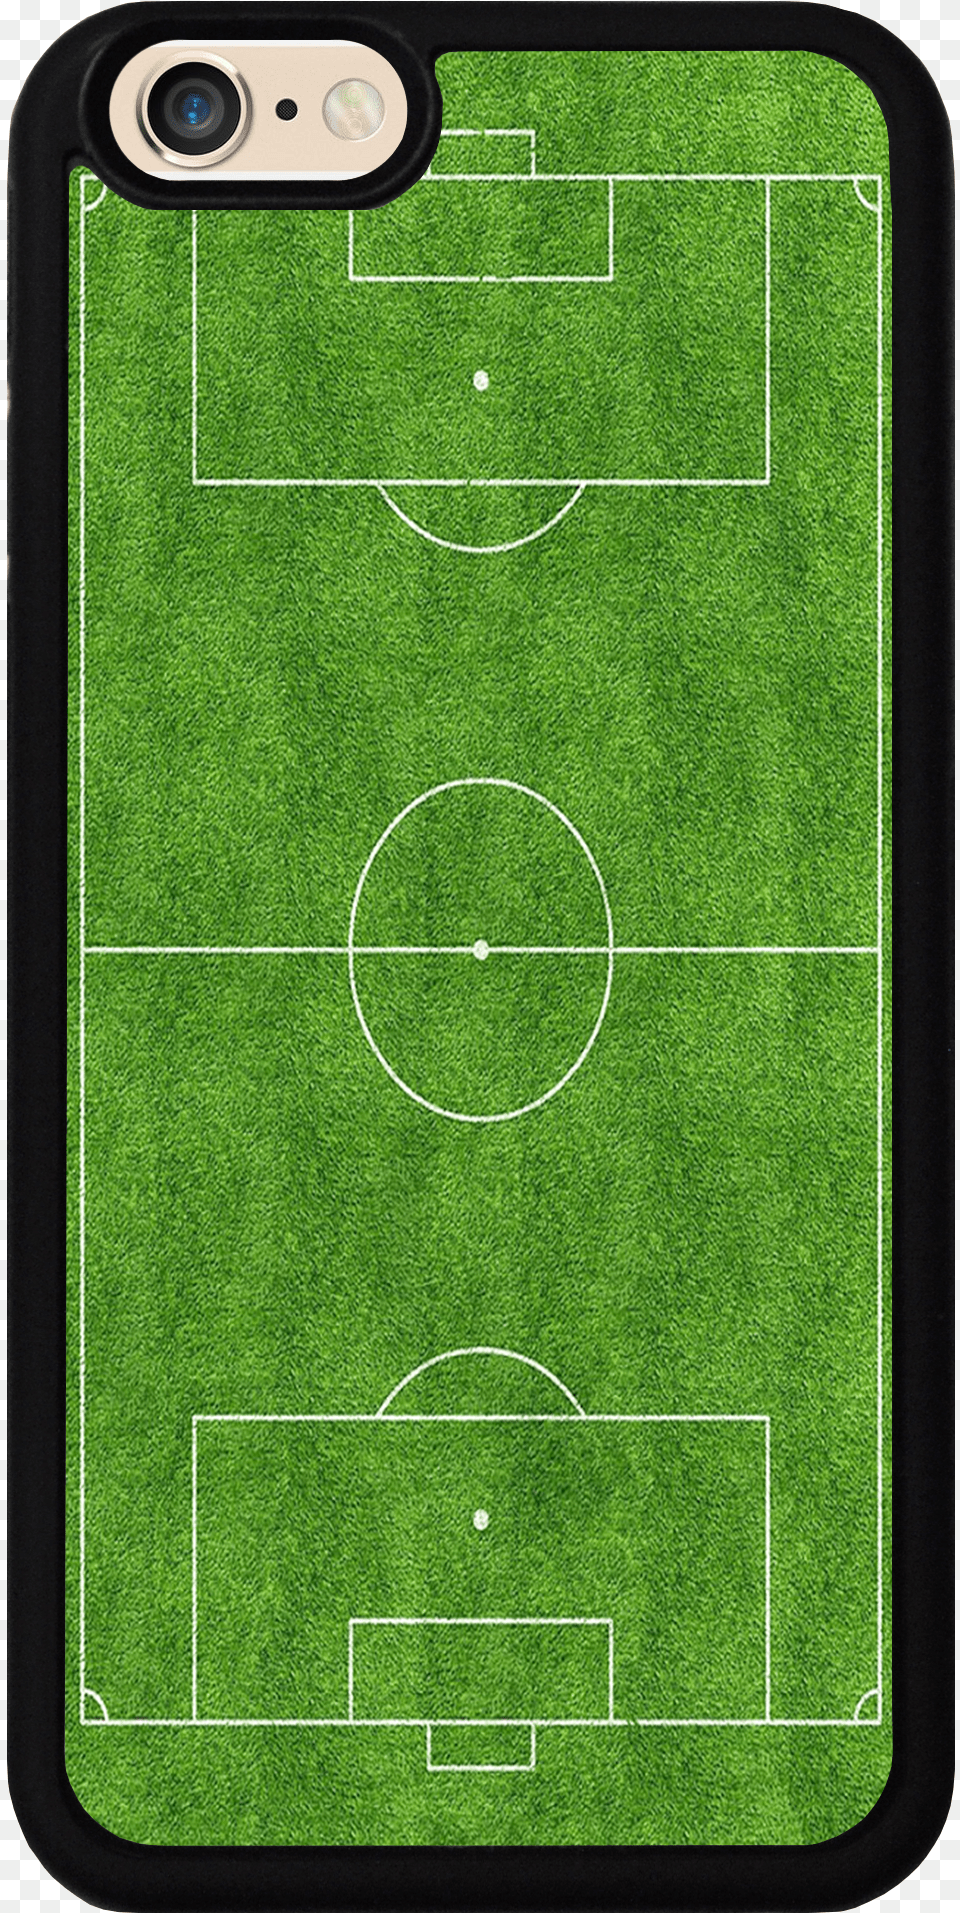 Soccer Field For Ipad Pro, Mobile Phone, Electronics, Phone, Grass Png Image